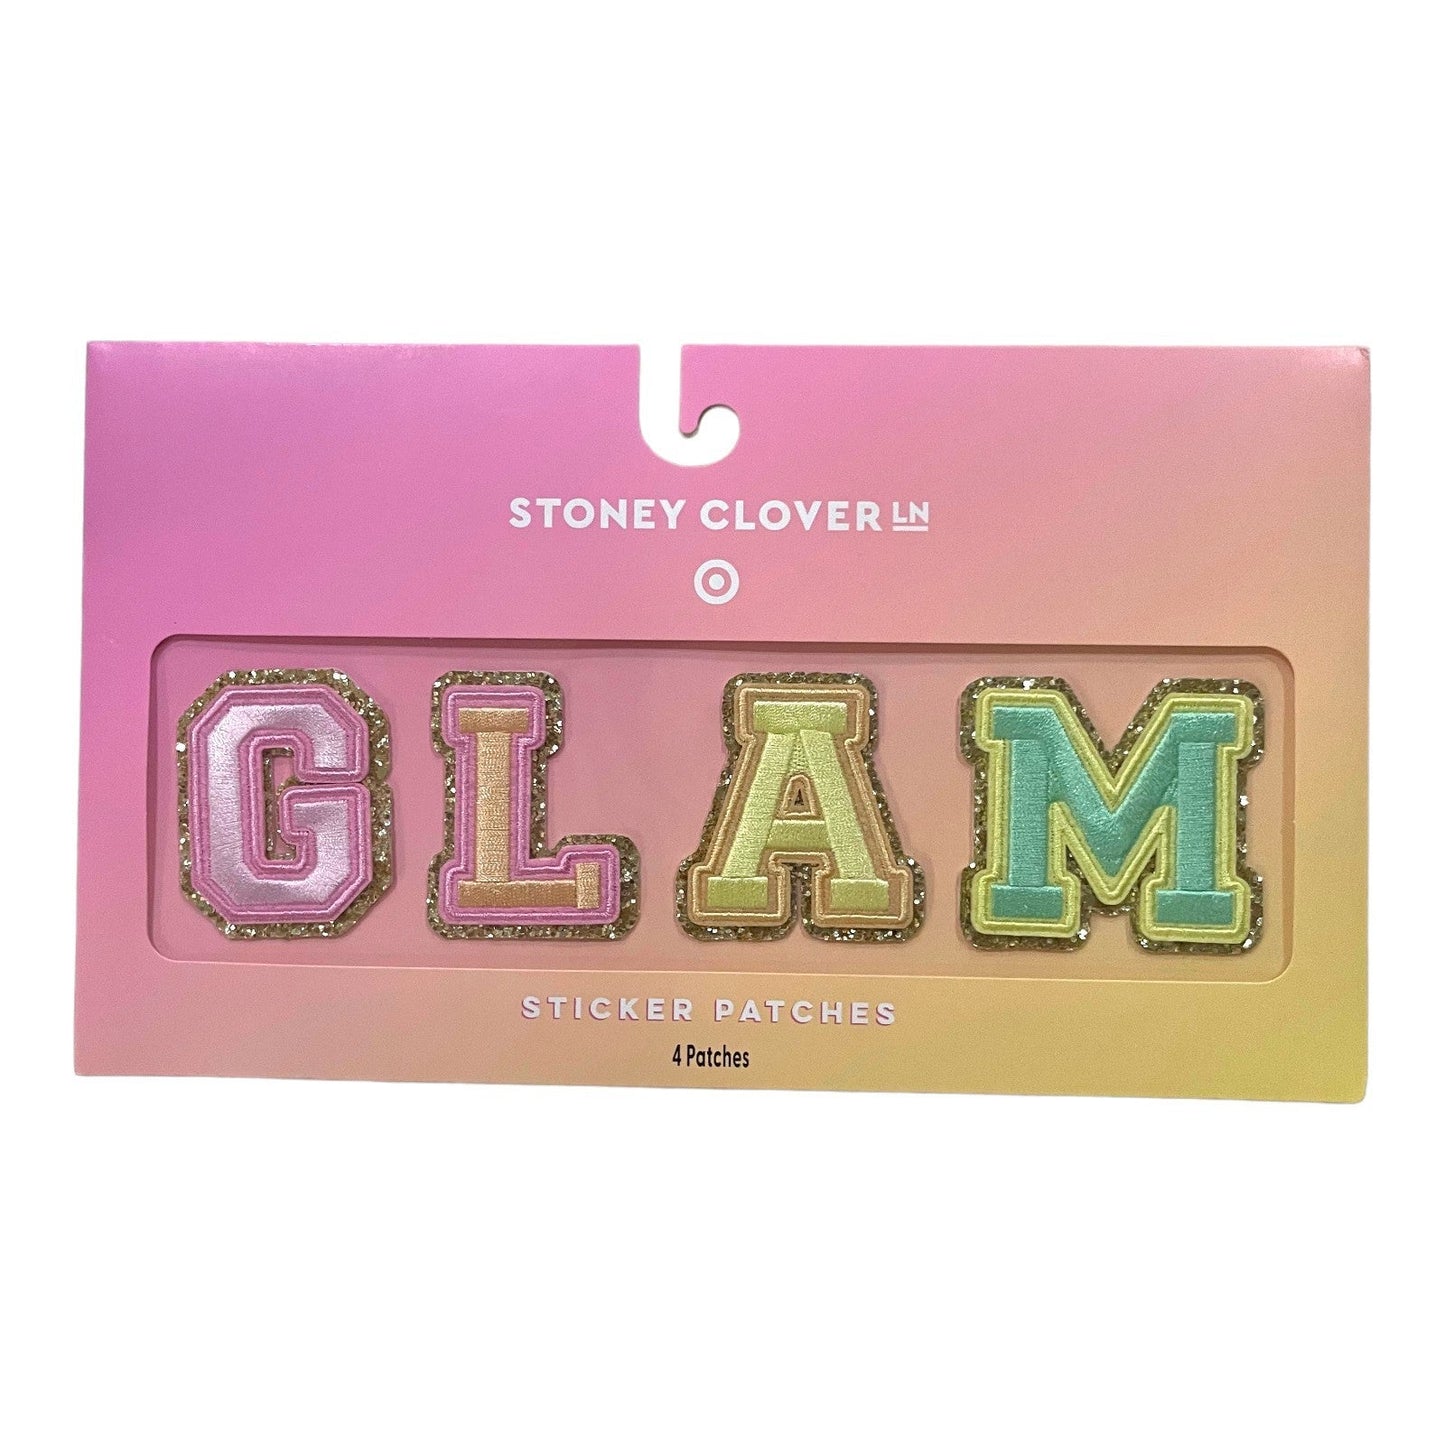 Stoney Clover Lane Adhesive Patches - GLAM Patch